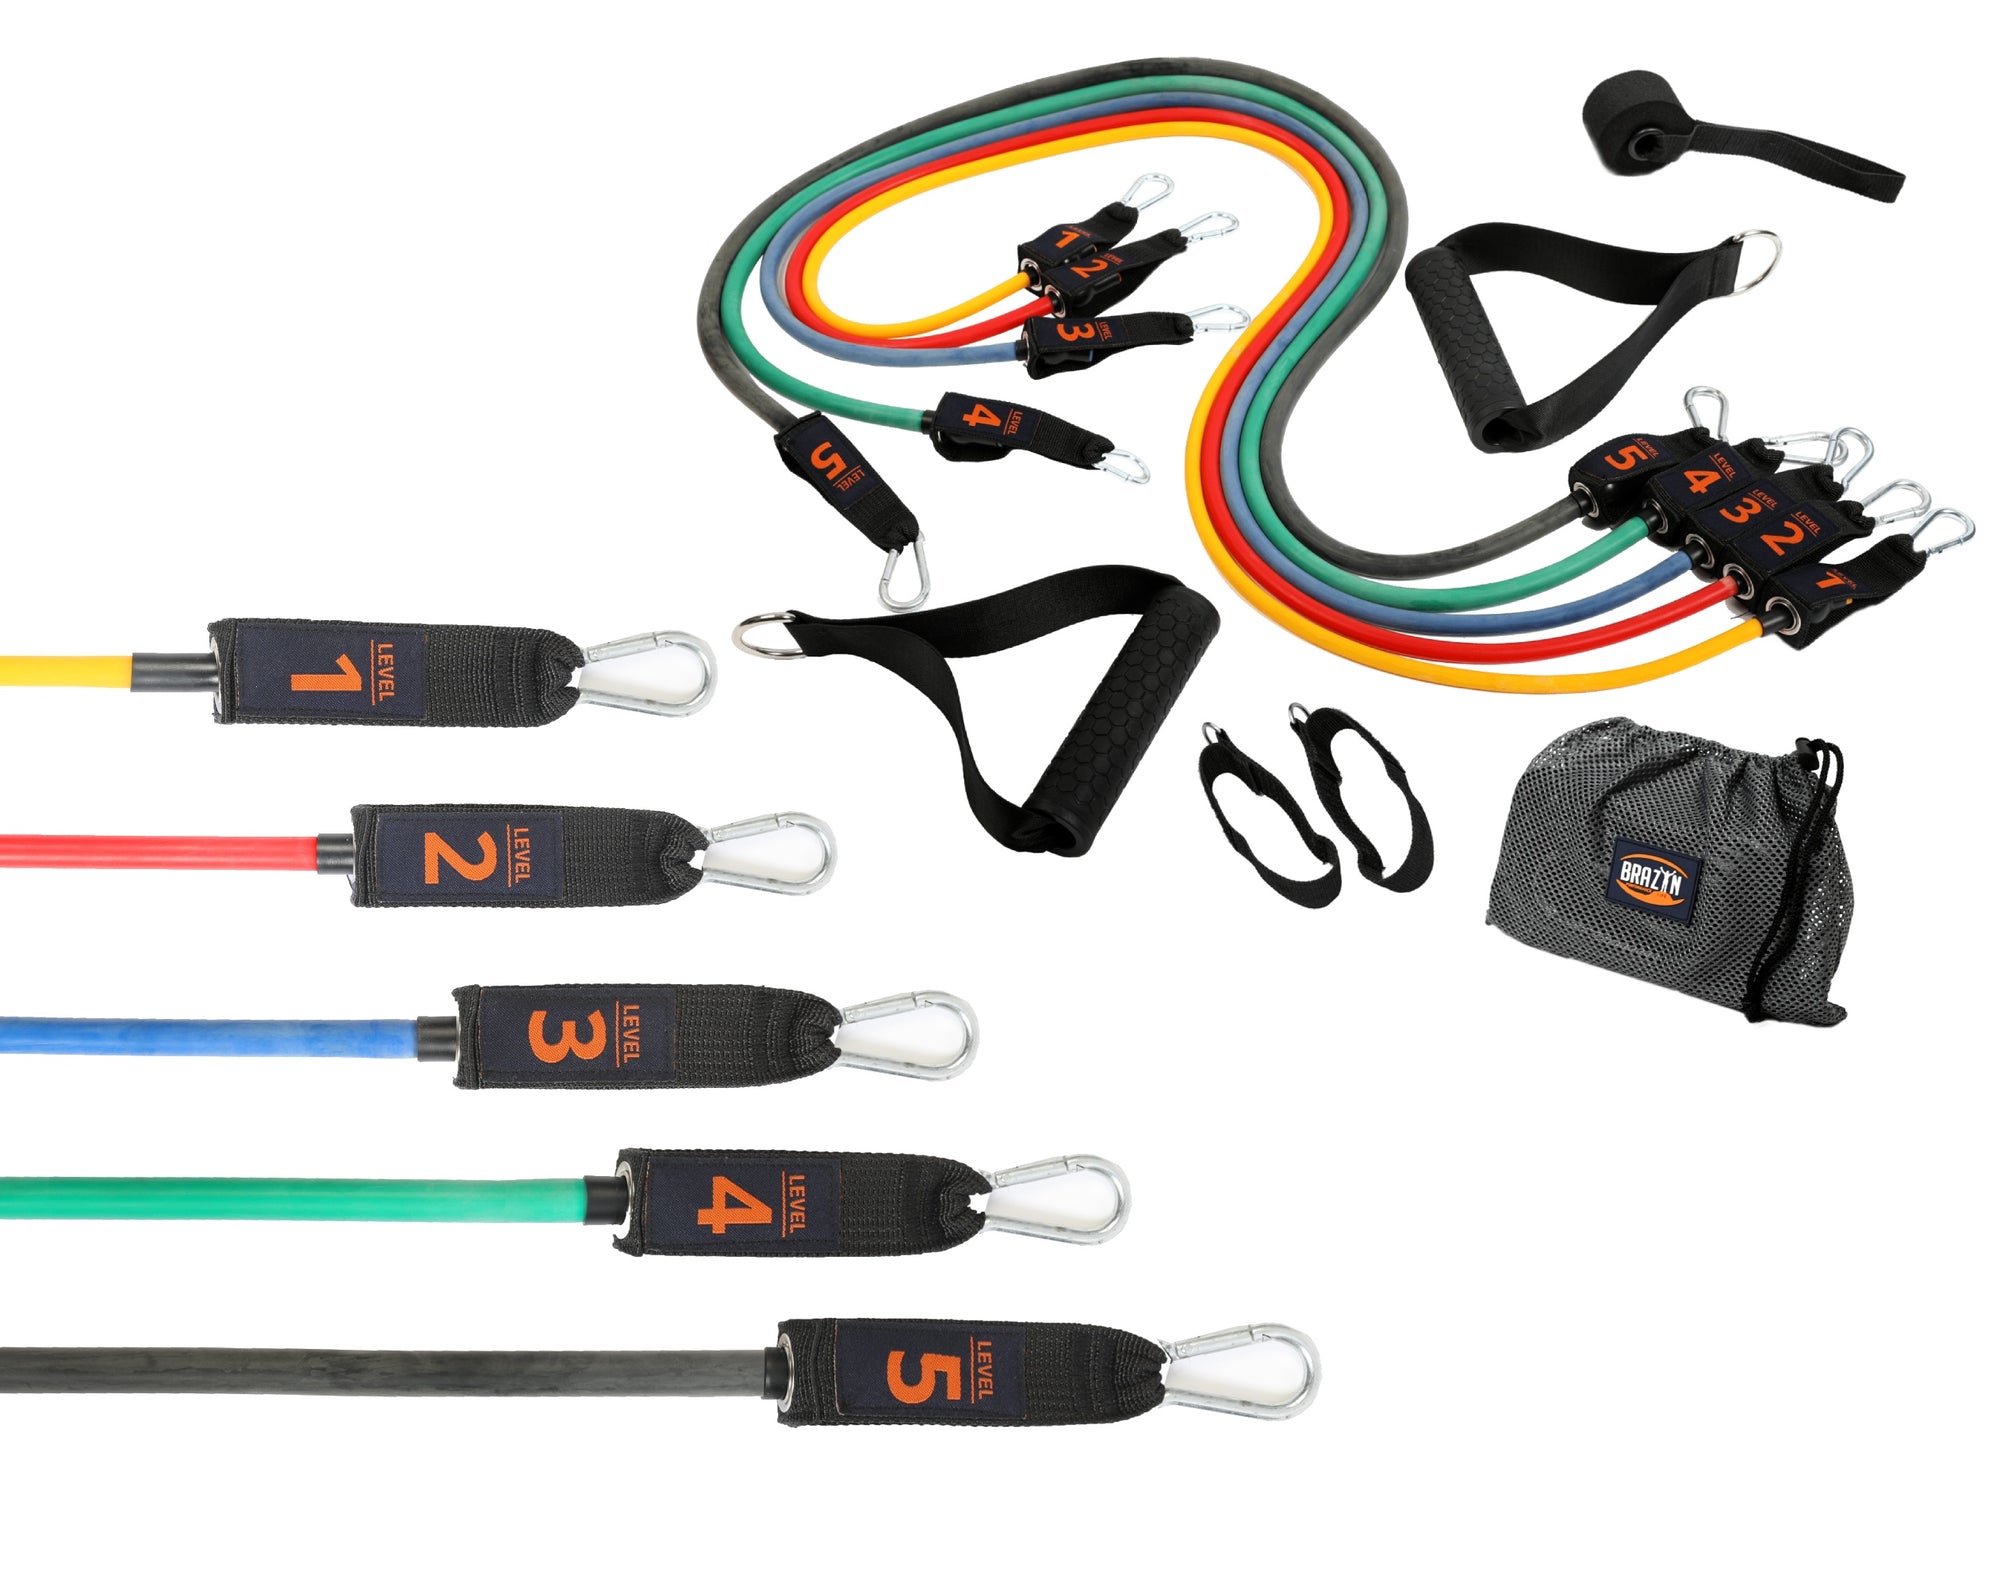 resistance band kit showing different exercise bands